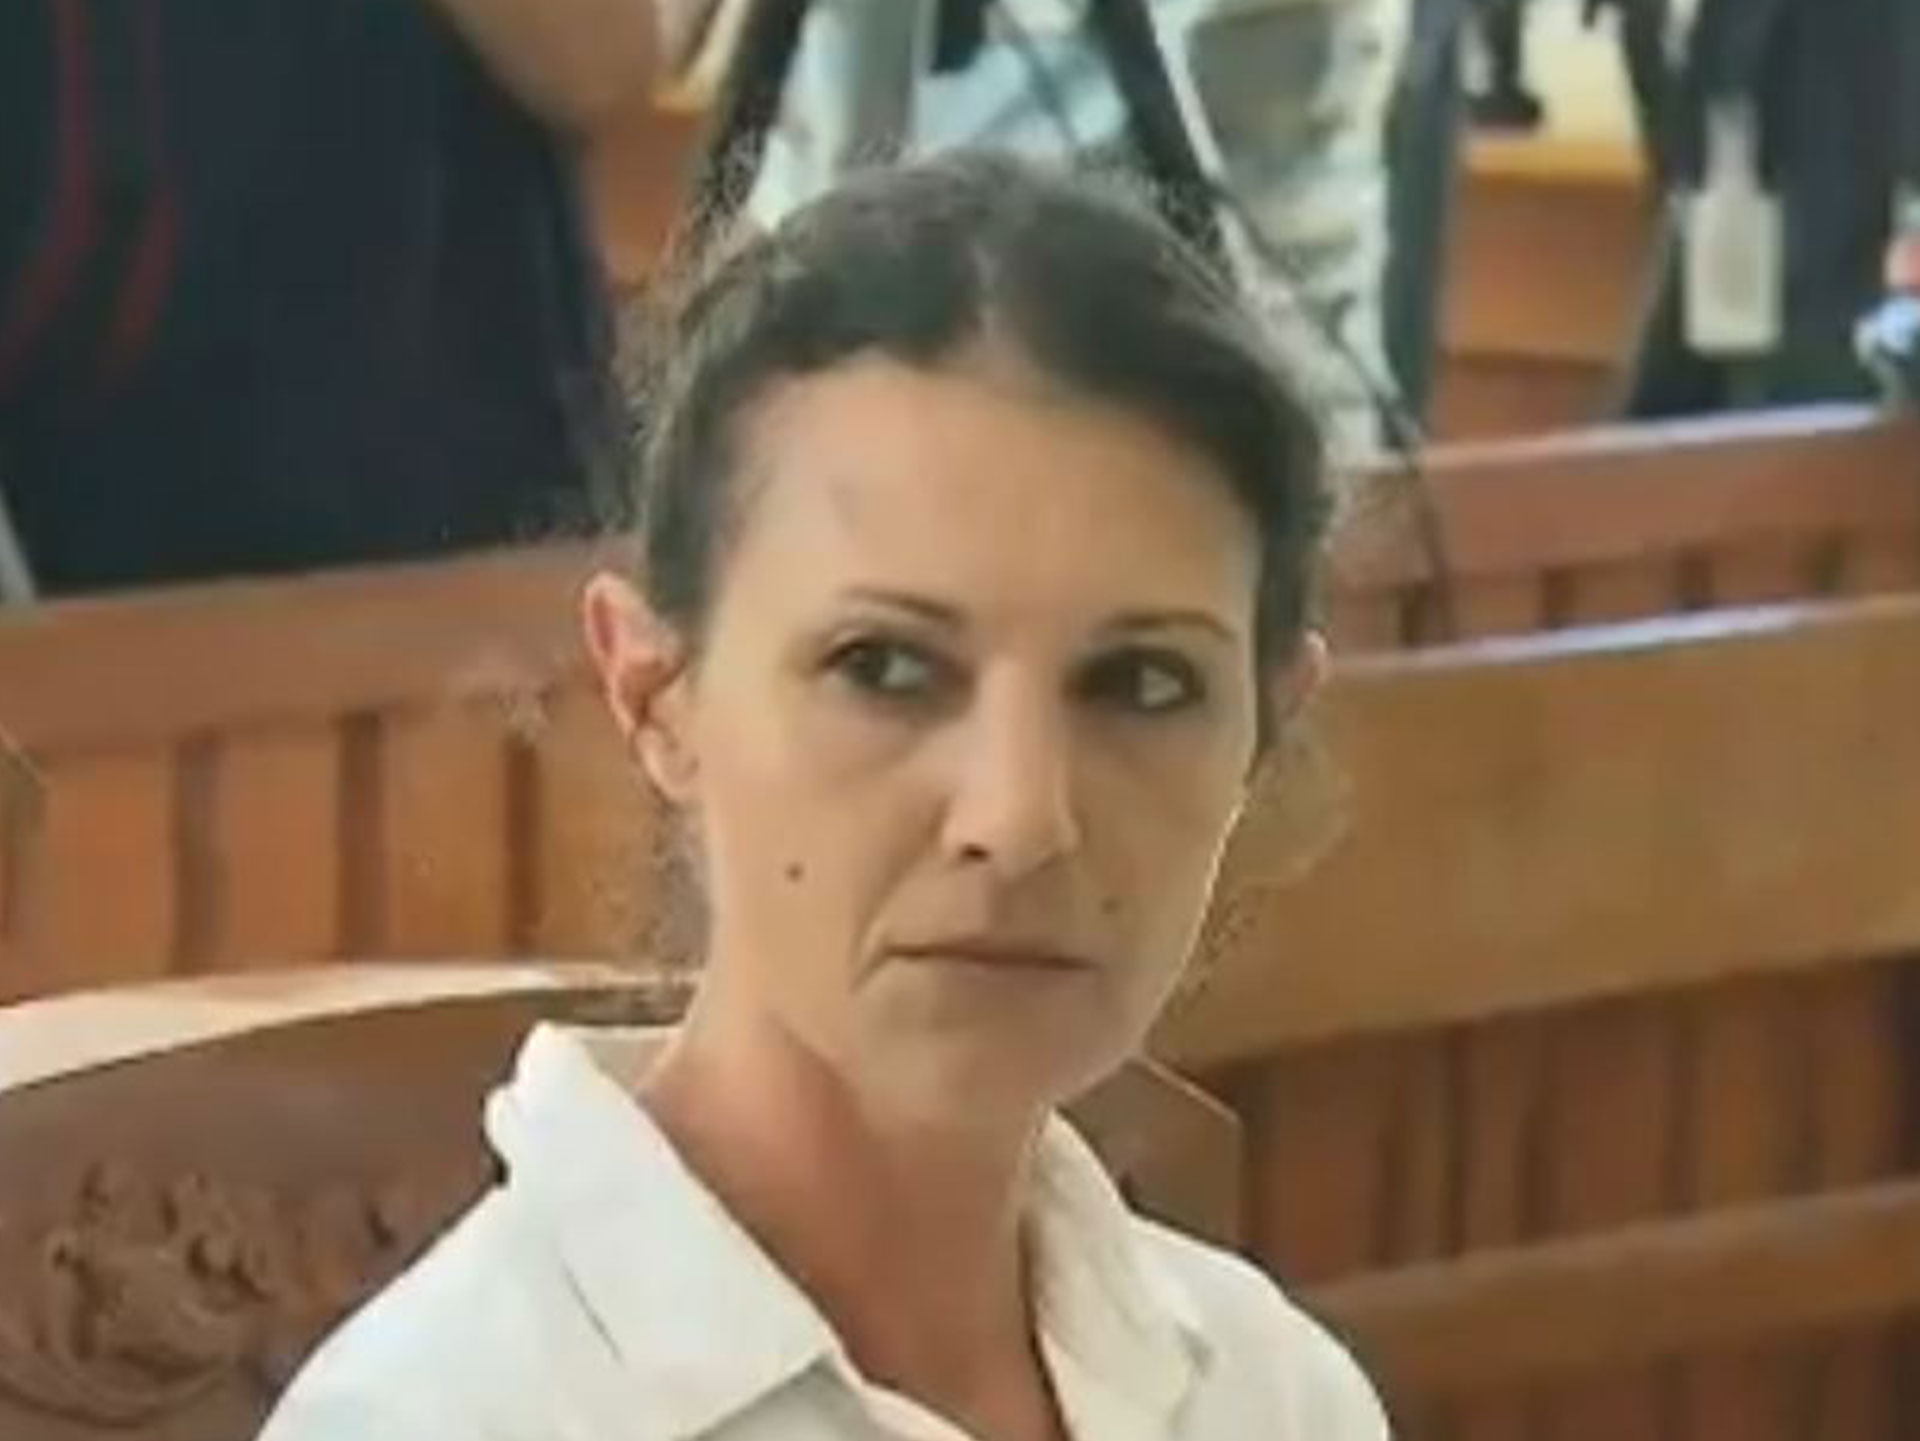 UPDATED: Sara Connor’s jail sentence has been increased